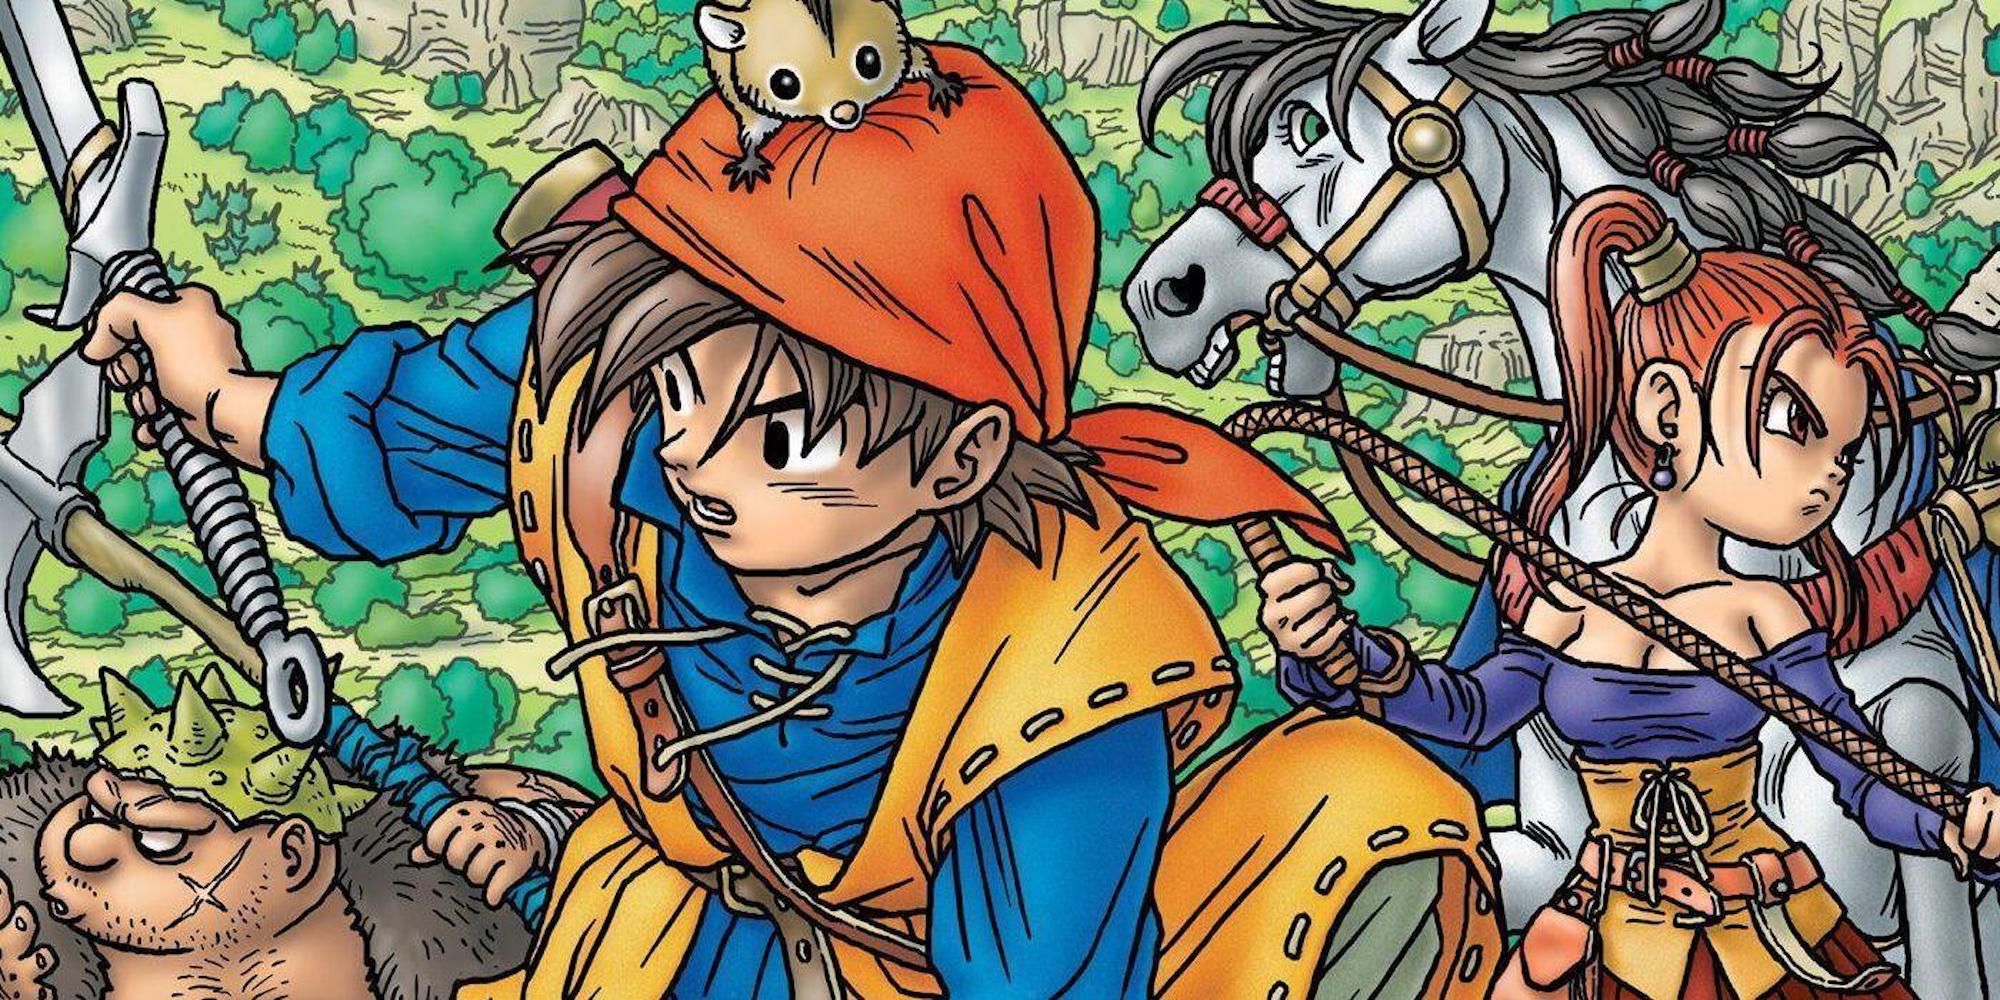 Promo art featuring characters in Dragon Quest 8